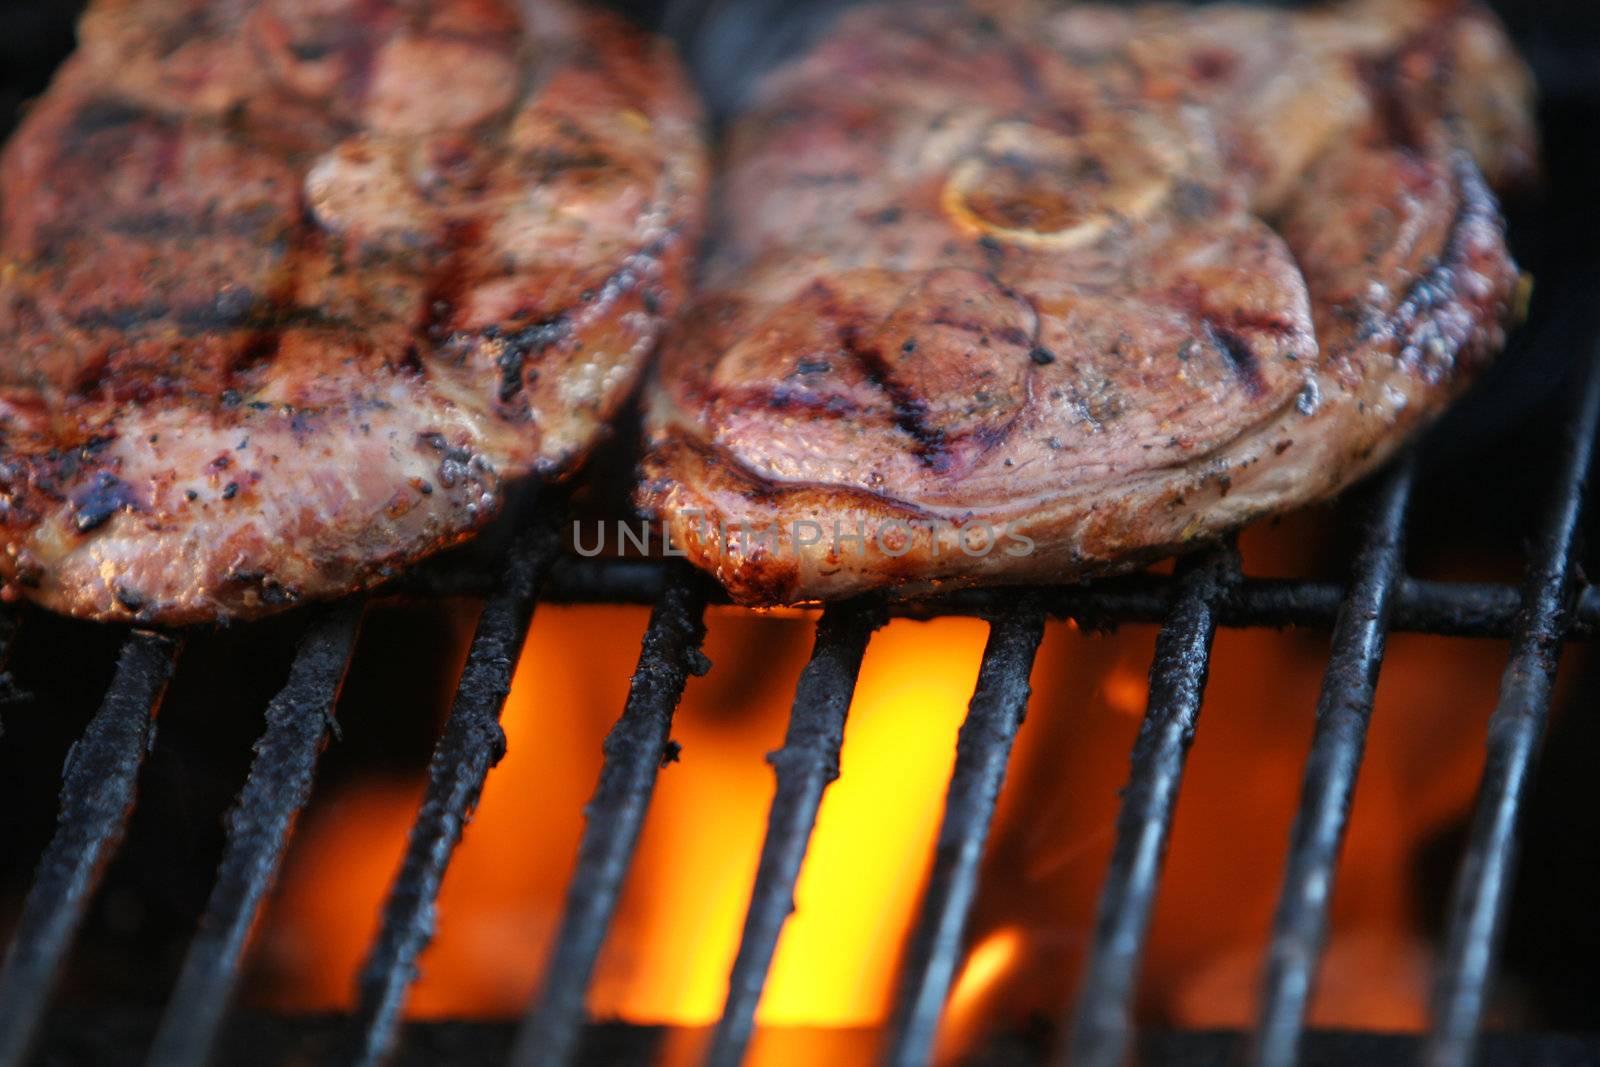 Lamb chops being barbecued on a gasgrill, flames visible beneath meat